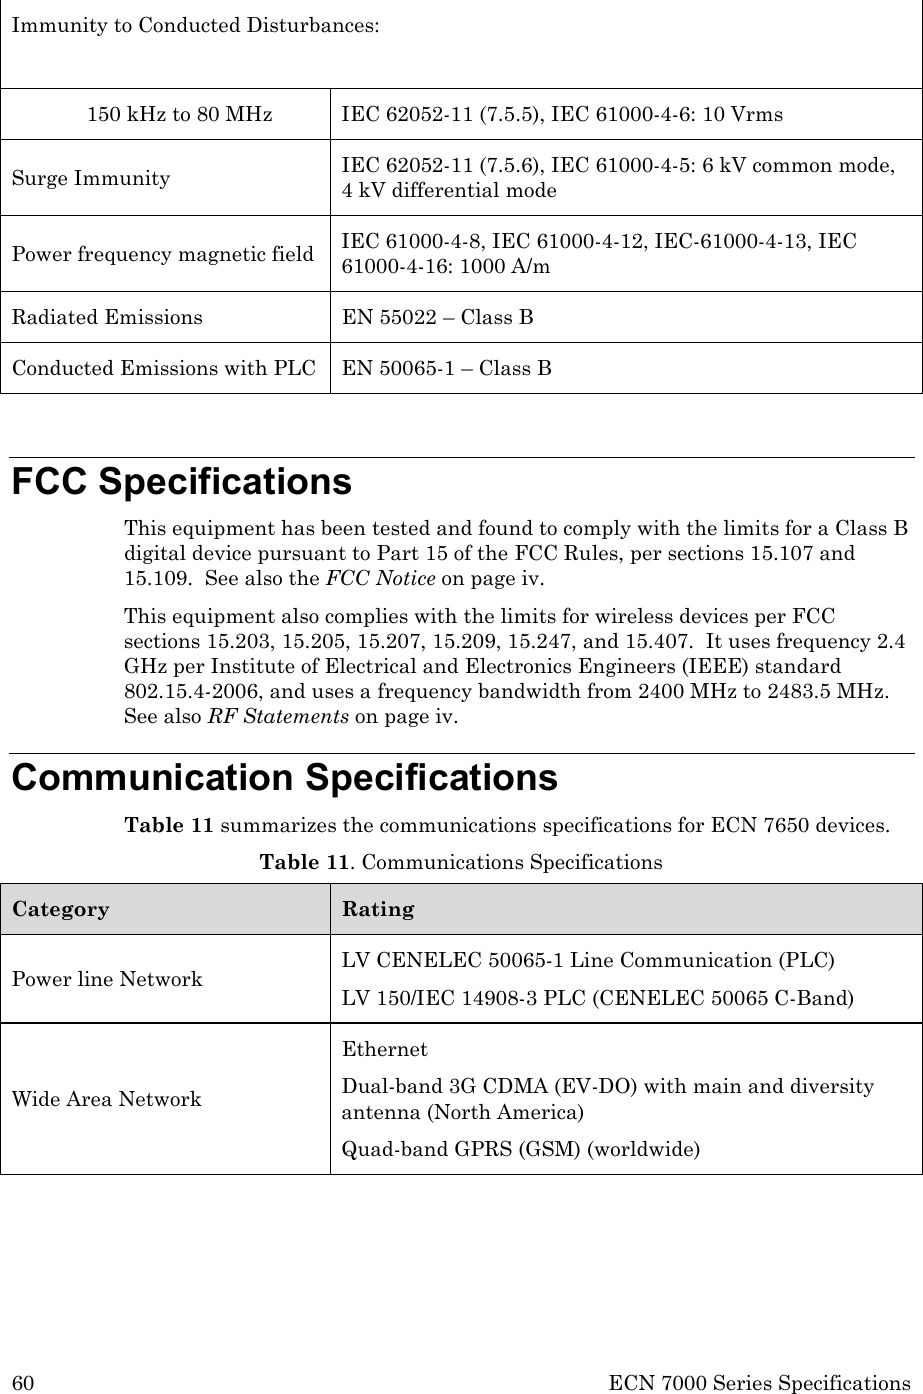 60 ECN 7000 Series Specifications  Immunity to Conducted Disturbances:   150 kHz to 80 MHz IEC 62052-11 (7.5.5), IEC 61000-4-6: 10 Vrms Surge Immunity  IEC 62052-11 (7.5.6), IEC 61000-4-5: 6 kV common mode, 4 kV differential mode Power frequency magnetic field IEC 61000-4-8, IEC 61000-4-12, IEC-61000-4-13, IEC 61000-4-16: 1000 A/m Radiated Emissions EN 55022 – Class B Conducted Emissions with PLC EN 50065-1 – Class B  FCC Specifications This equipment has been tested and found to comply with the limits for a Class B digital device pursuant to Part 15 of the FCC Rules, per sections 15.107 and 15.109.  See also the FCC Notice on page iv. This equipment also complies with the limits for wireless devices per FCC sections 15.203, 15.205, 15.207, 15.209, 15.247, and 15.407.  It uses frequency 2.4 GHz per Institute of Electrical and Electronics Engineers (IEEE) standard 802.15.4-2006, and uses a frequency bandwidth from 2400 MHz to 2483.5 MHz.  See also RF Statements on page iv. Communication Specifications Table 11 summarizes the communications specifications for ECN 7650 devices. Table 11. Communications Specifications Category Rating Power line Network LV CENELEC 50065-1 Line Communication (PLC) LV 150/IEC 14908-3 PLC (CENELEC 50065 C-Band) Wide Area Network Ethernet Dual-band 3G CDMA (EV-DO) with main and diversity antenna (North America) Quad-band GPRS (GSM) (worldwide) 